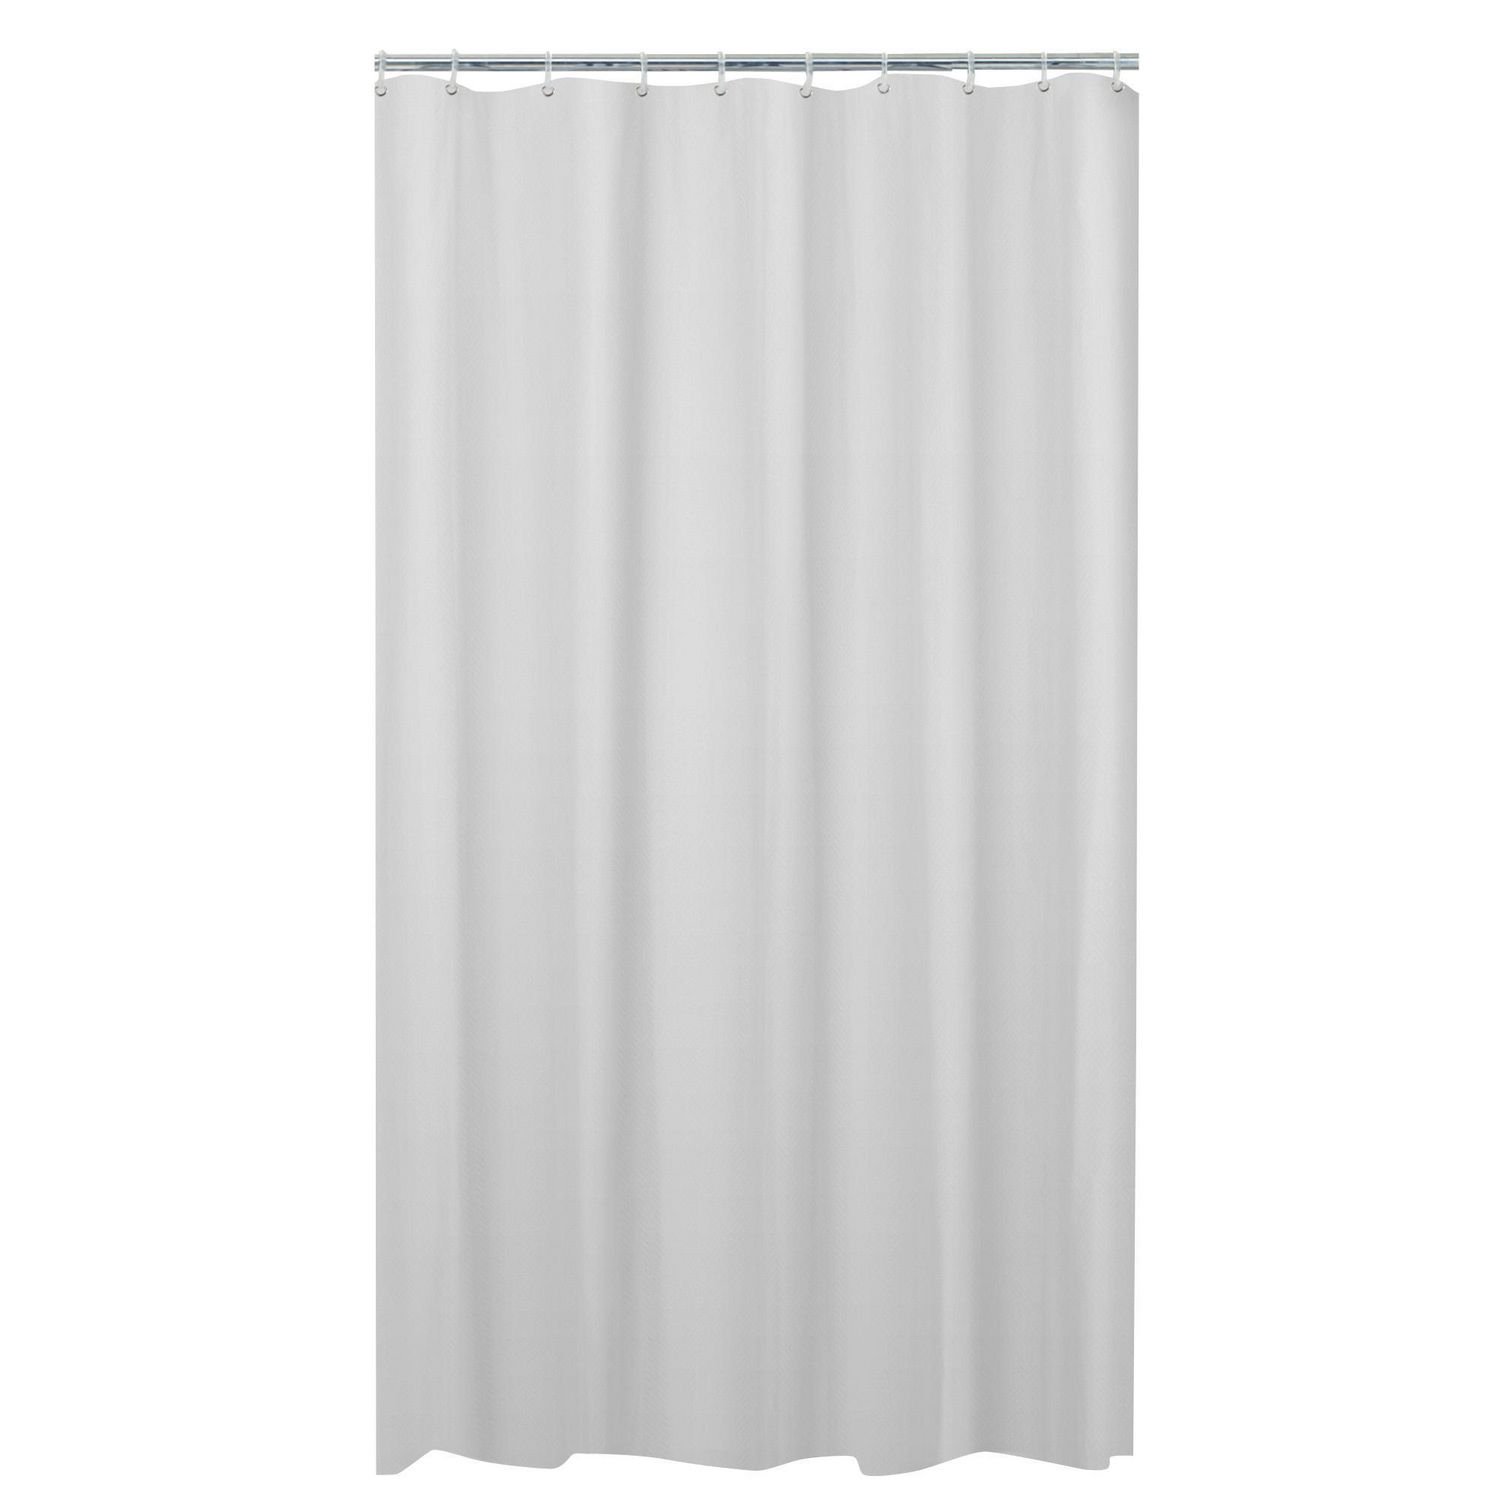 CANVAS Fabric Machine Wash Charcoal Shower Curtain, 72-in x 72-in